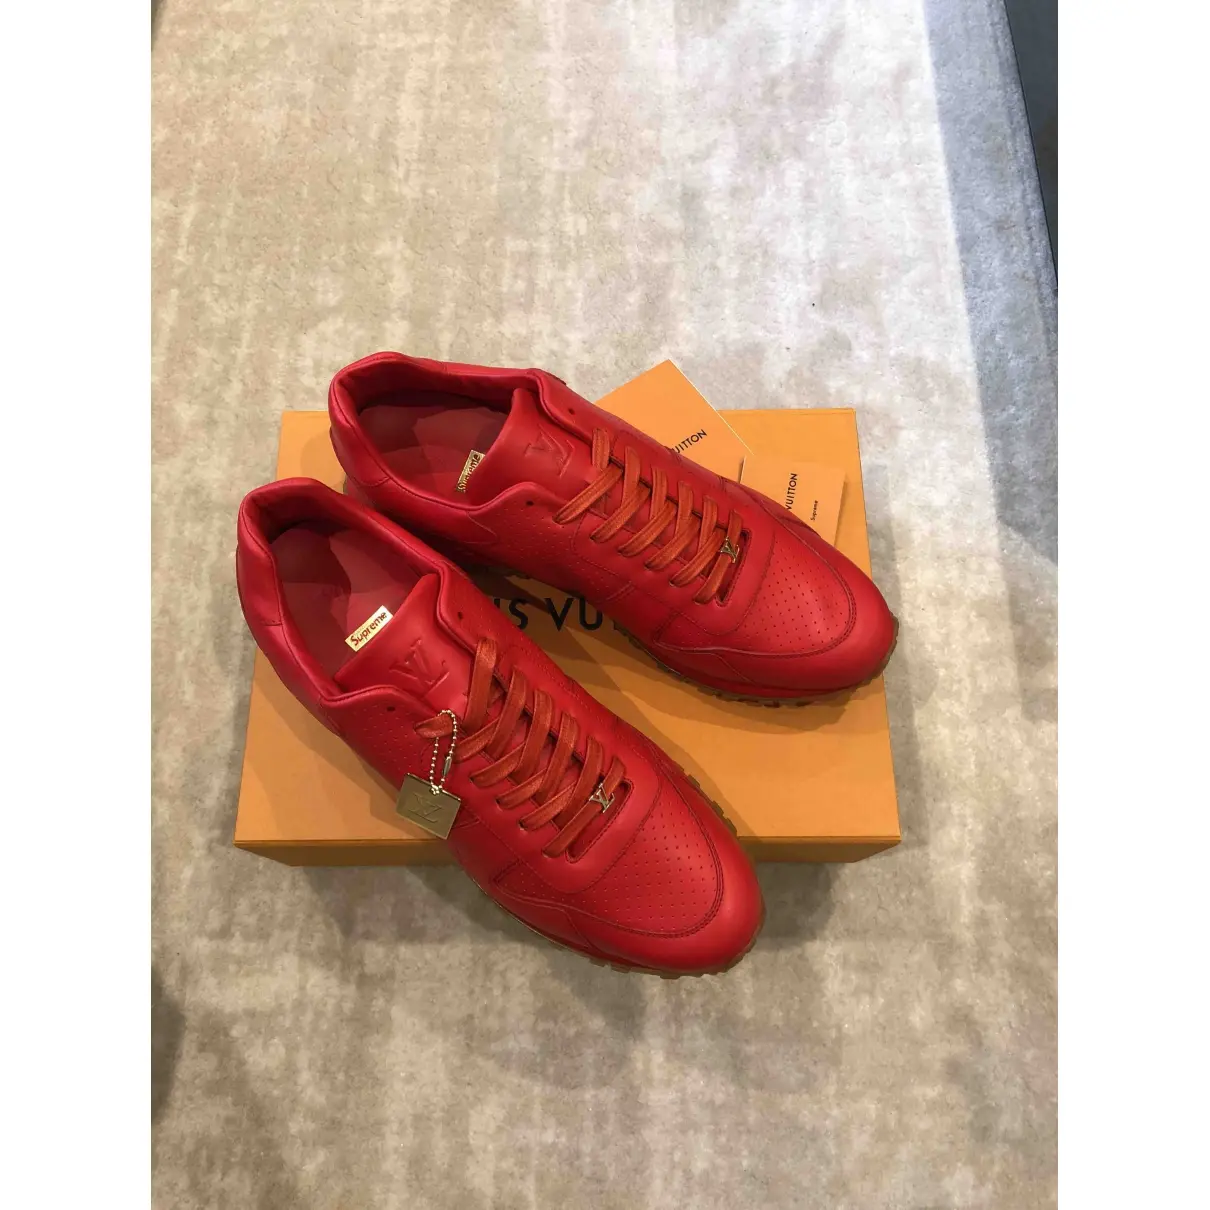 Louis Vuitton x Supreme Leather low trainers for sale